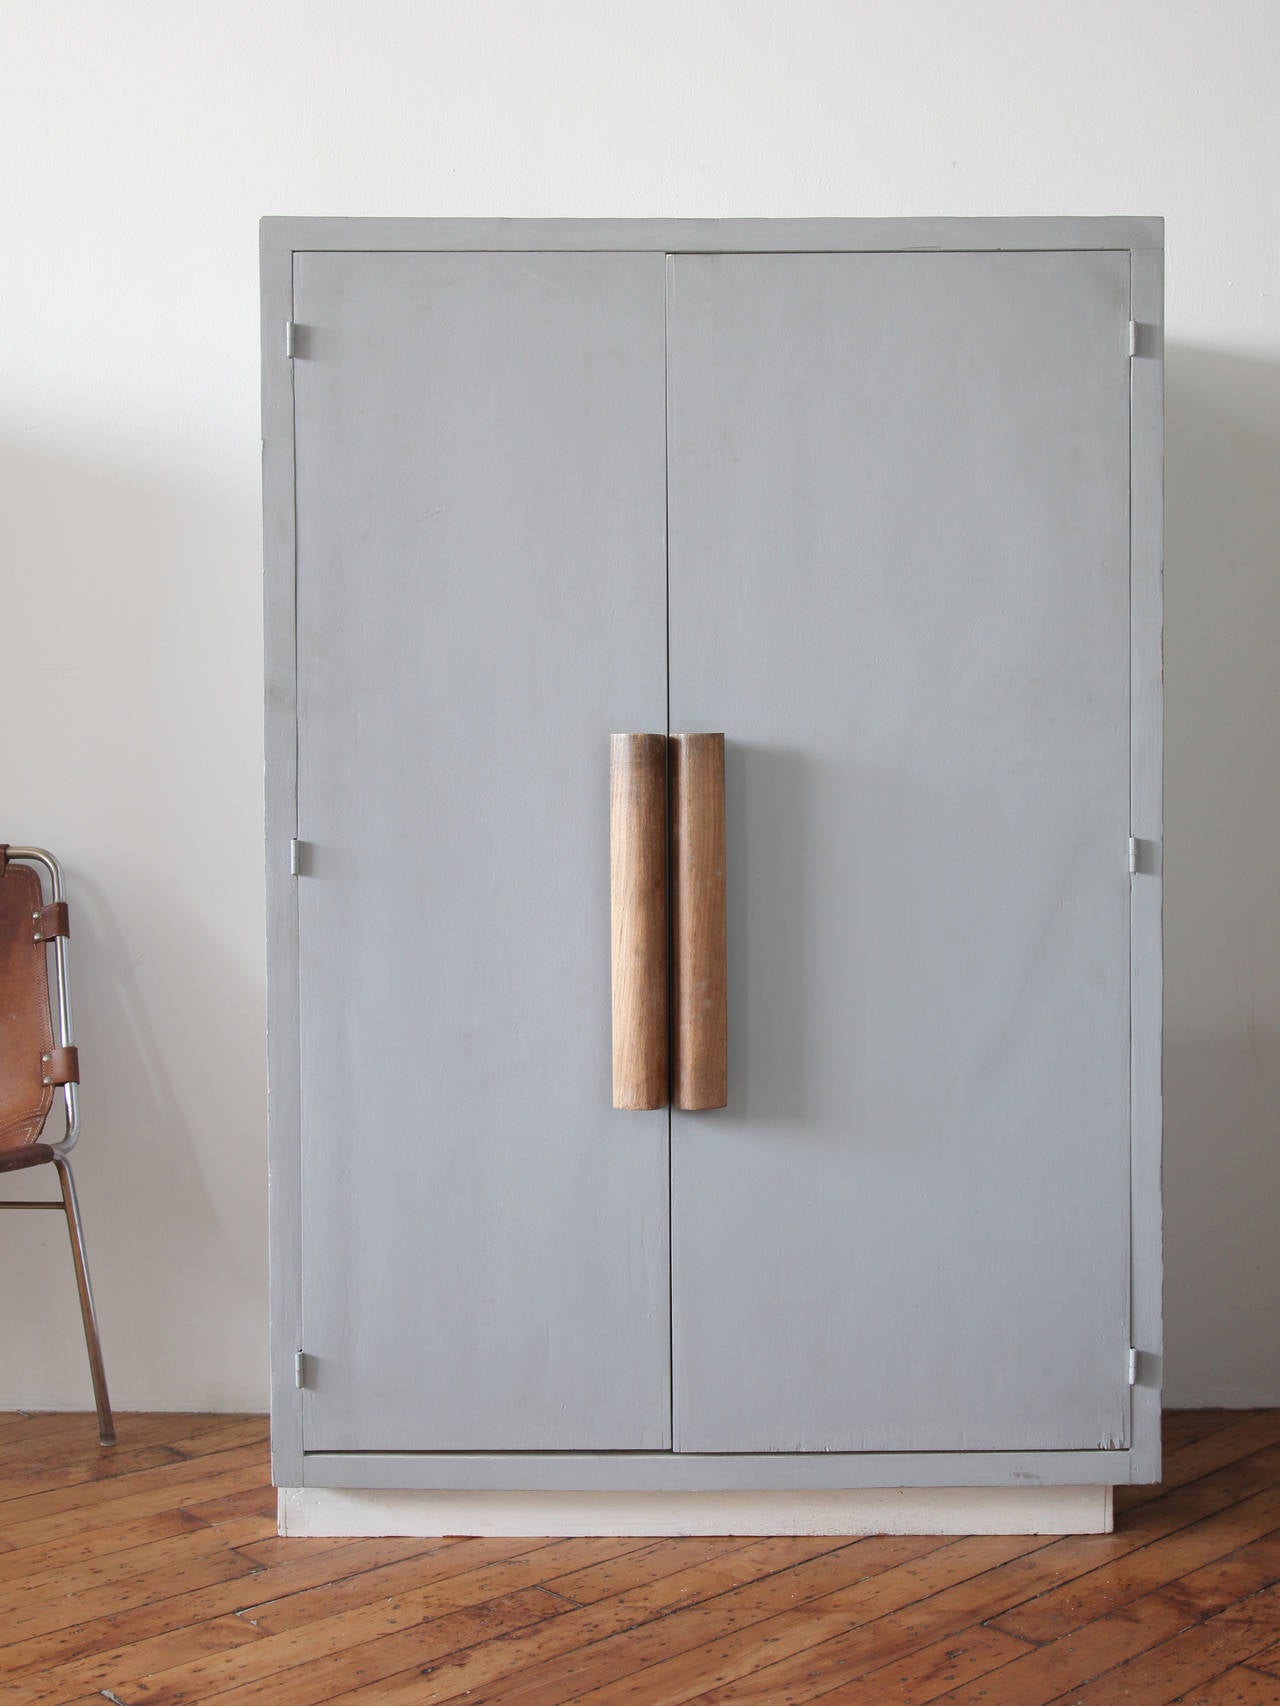 Armoire with carved wood handles and asymmetrical base meant for corner placement designed by Swiss architect Le Corbusier for a student room in his Unité d'habitation, Marseille.